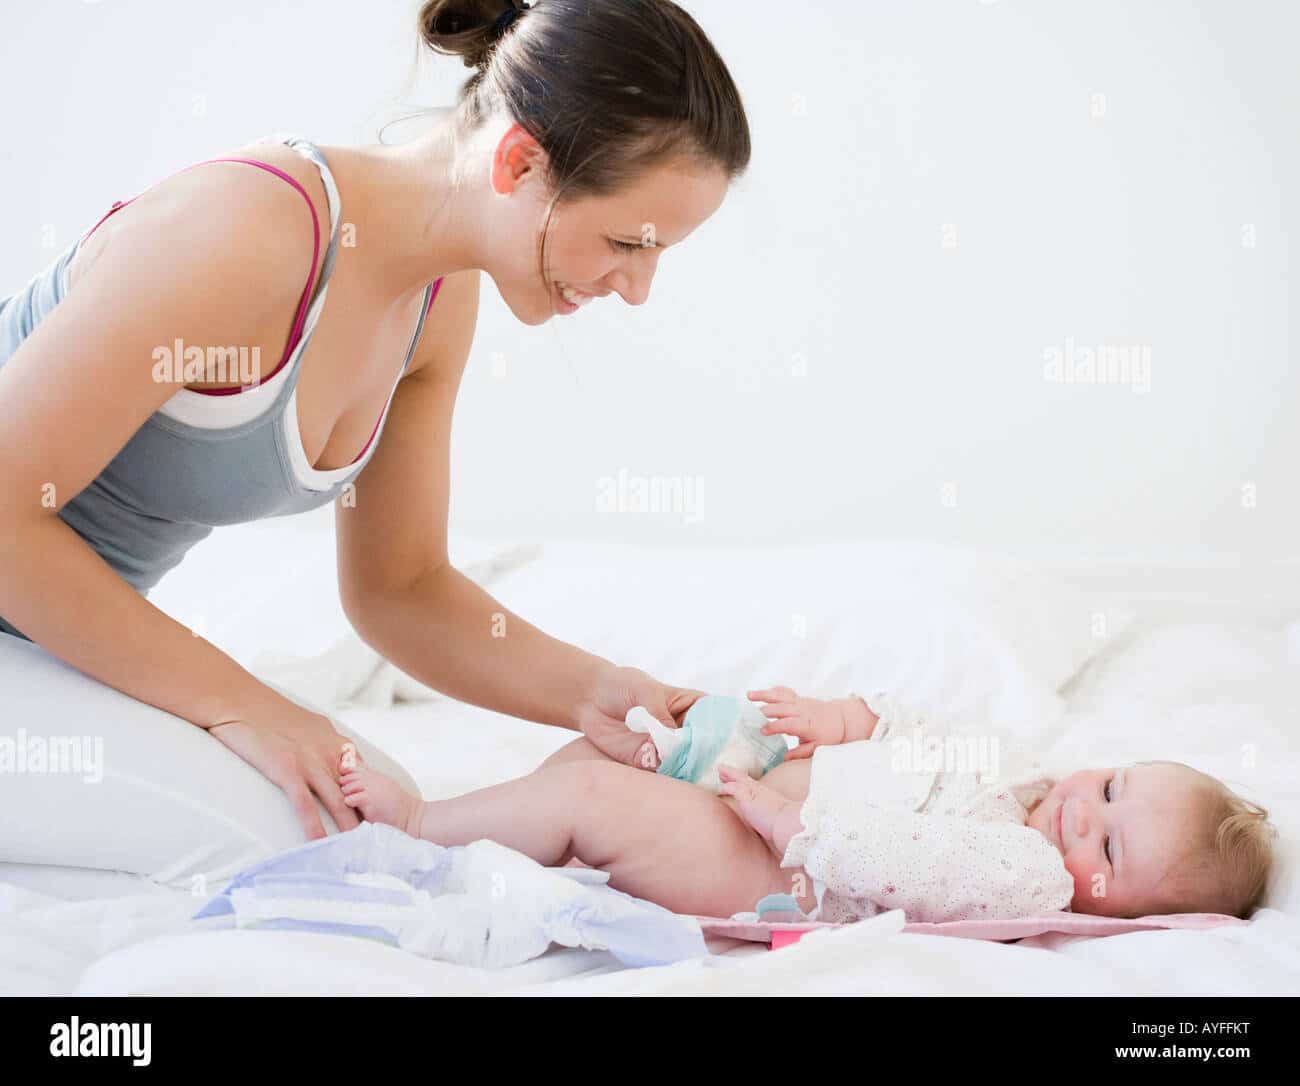 Mother changing babyâs diaper Stock Photo